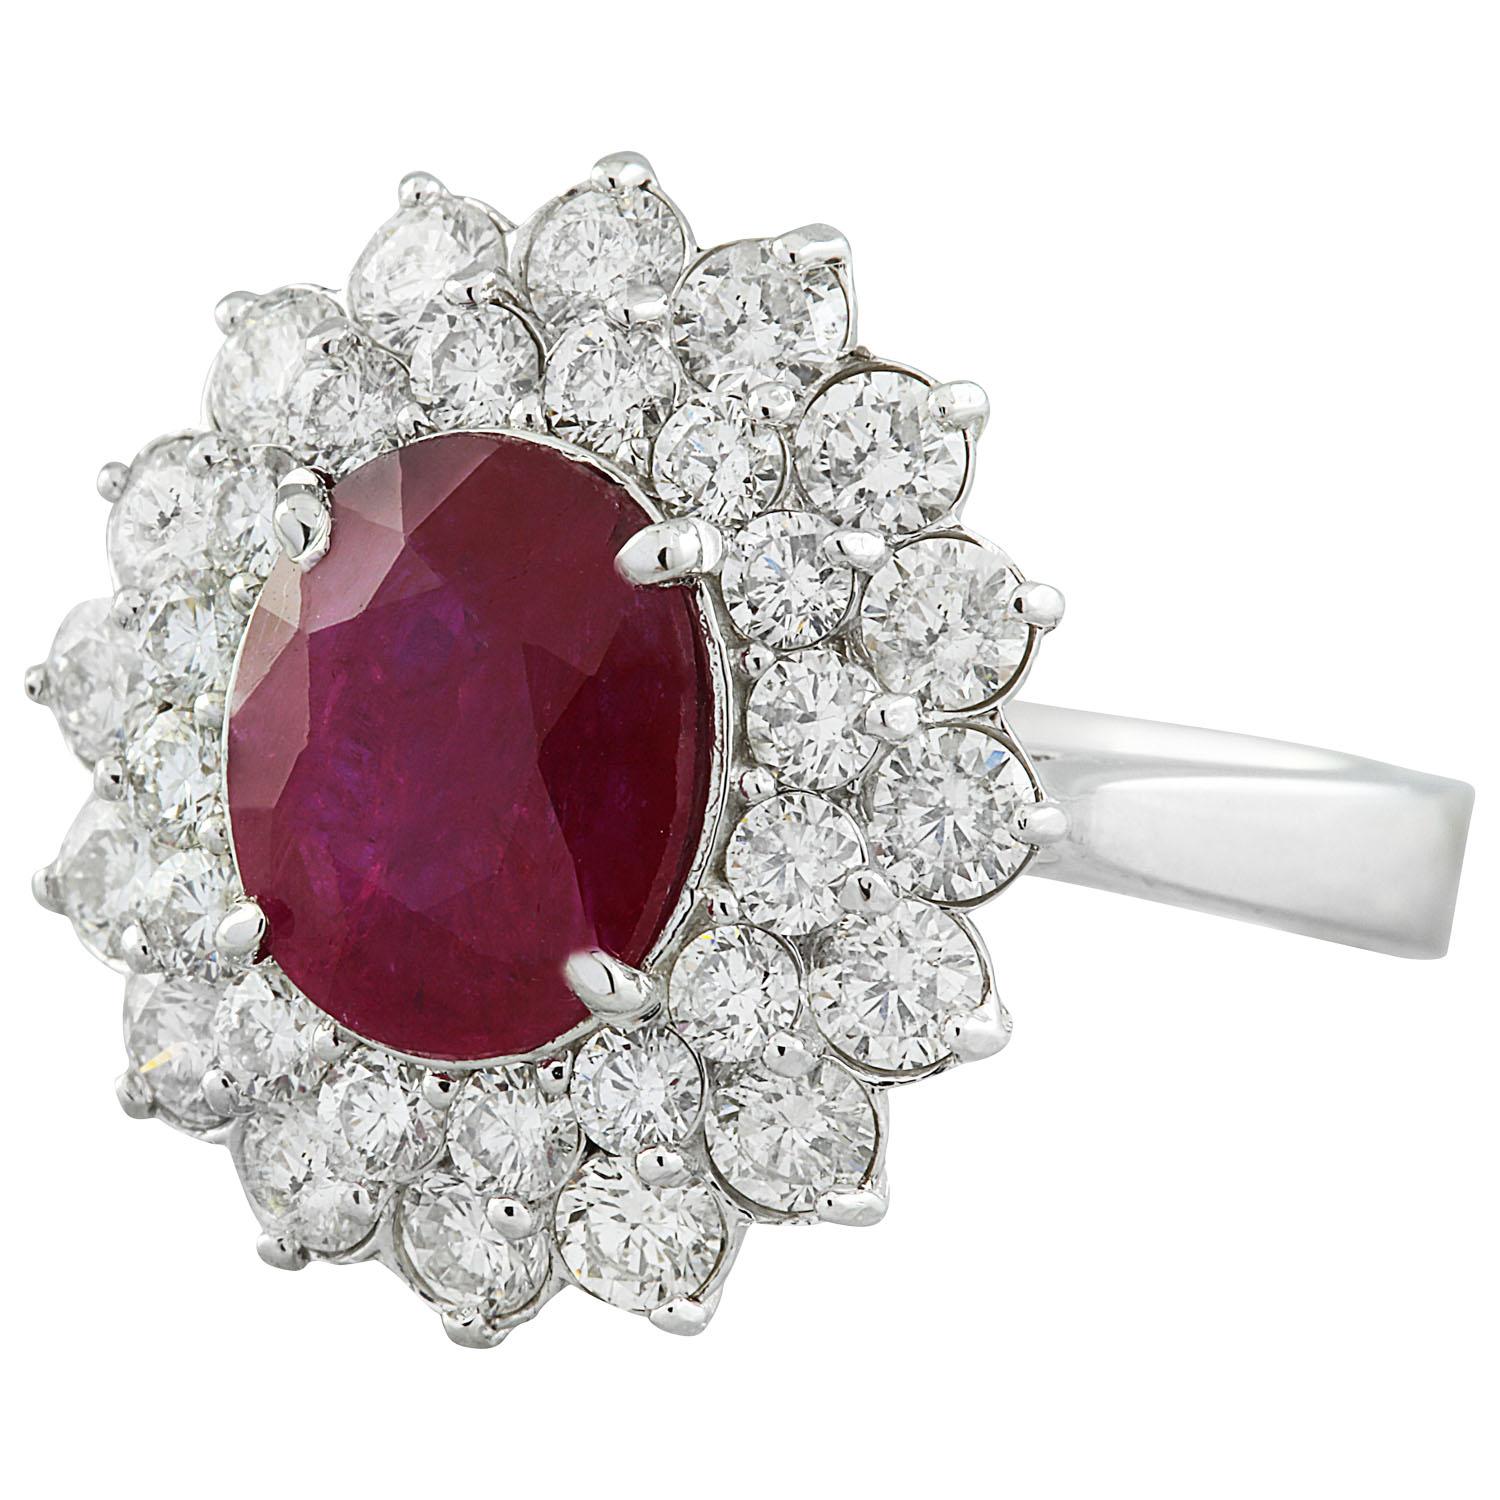 4.65 Carat Natural Ruby 14 Karat Solid White Gold Diamond Ring
Stamped: 14K 
Total Ring Weight: 6.4 Grams 
Ruby Weight 2.80 Carat (10.00x8.00 Millimeters)
Diamond Weight: 1.85 carat (F-G Color, VS2-SI1 Clarity )
Face Measures: 18.85x17.60 Millimeter